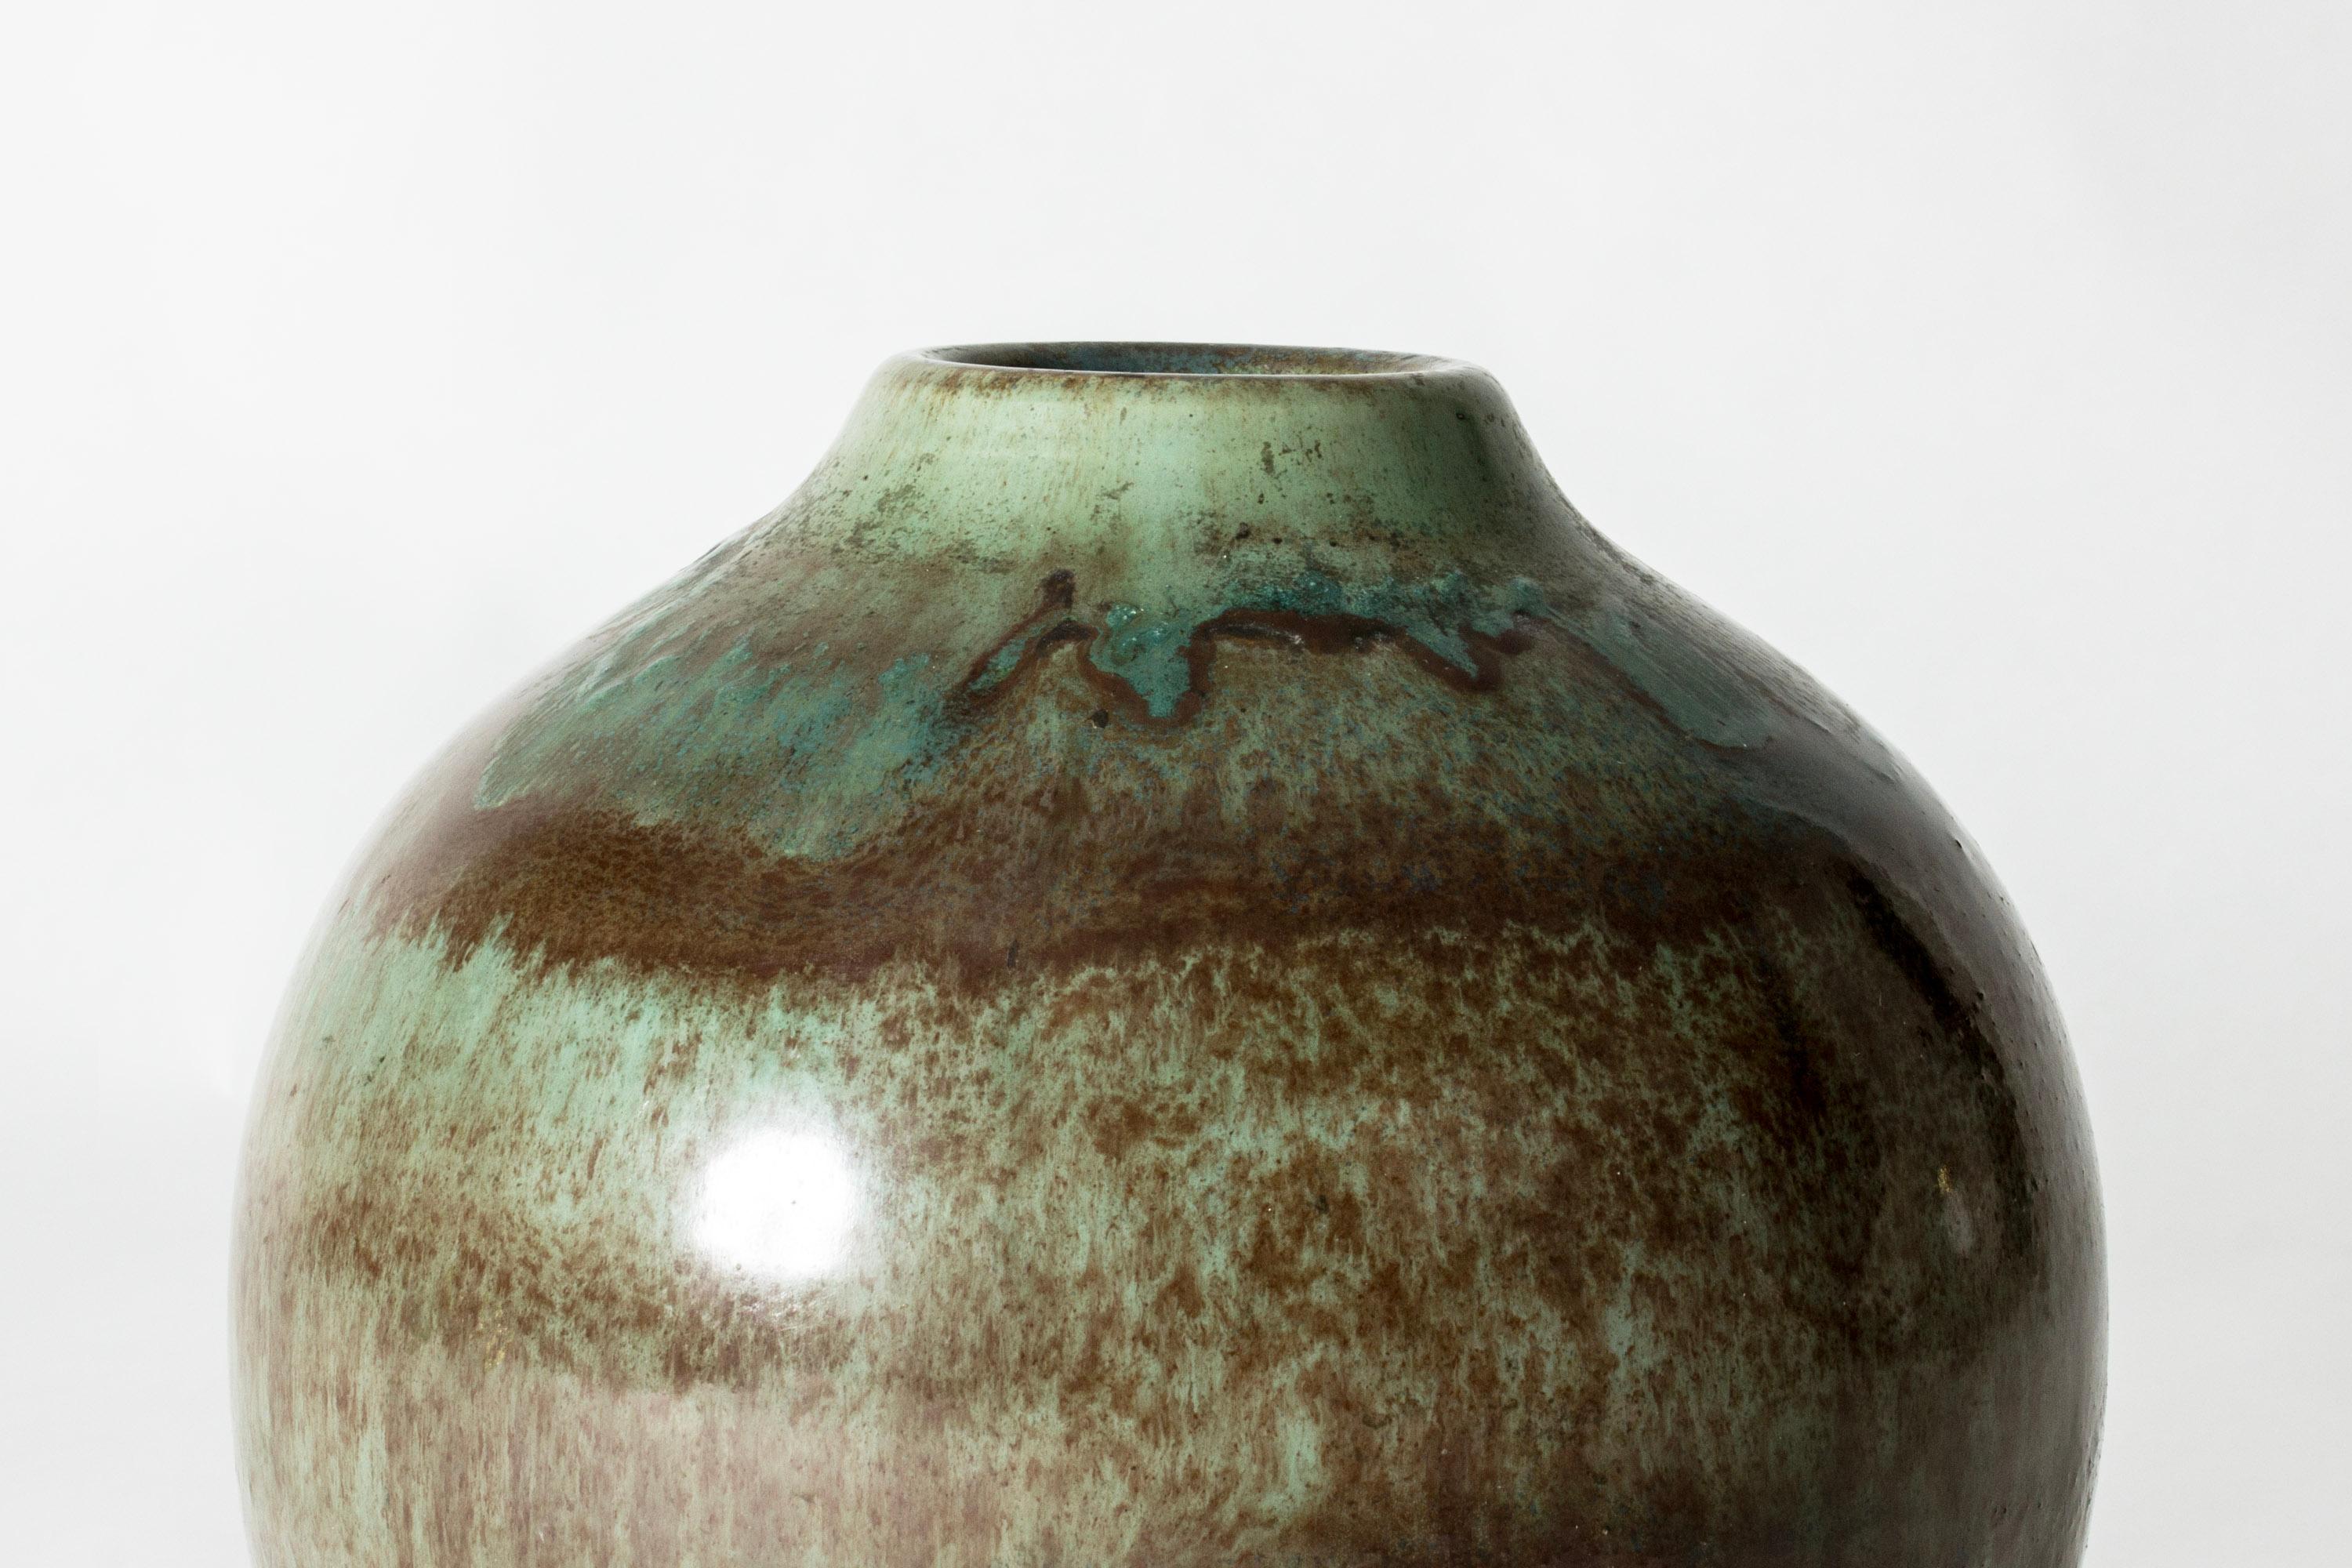 Stoneware floor vase by Gertrud Lönegren. Beautiful, subdued tones of ocean green and brown in runny, diluted strokes around the body.